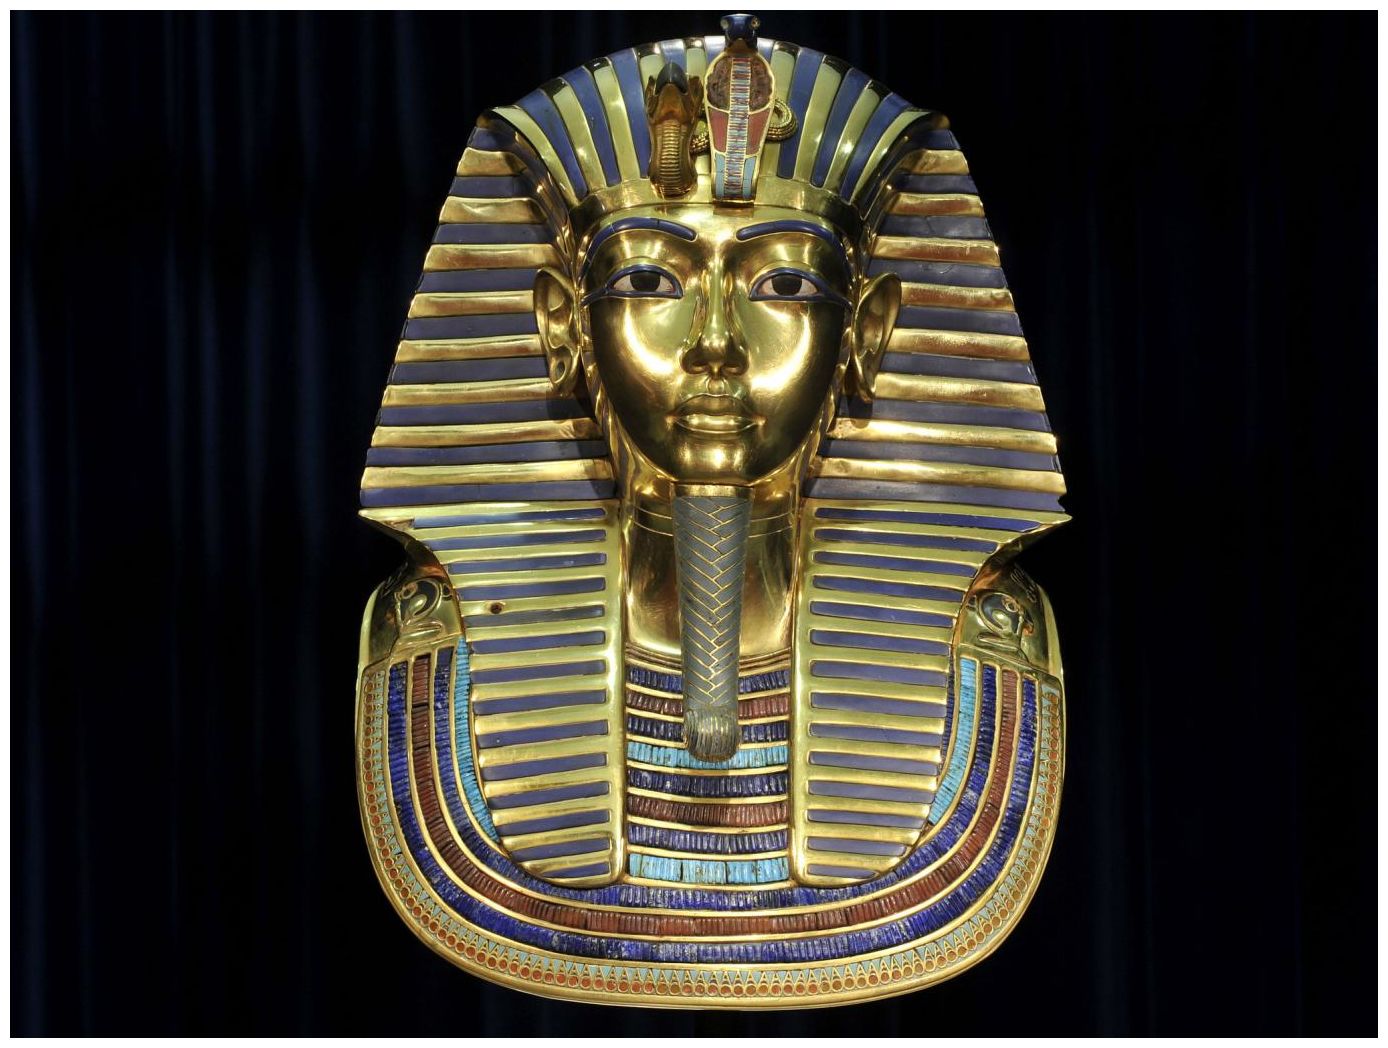 New Evidence Suggests King Tutankhamun S Gold Mask Was Made For Heretic